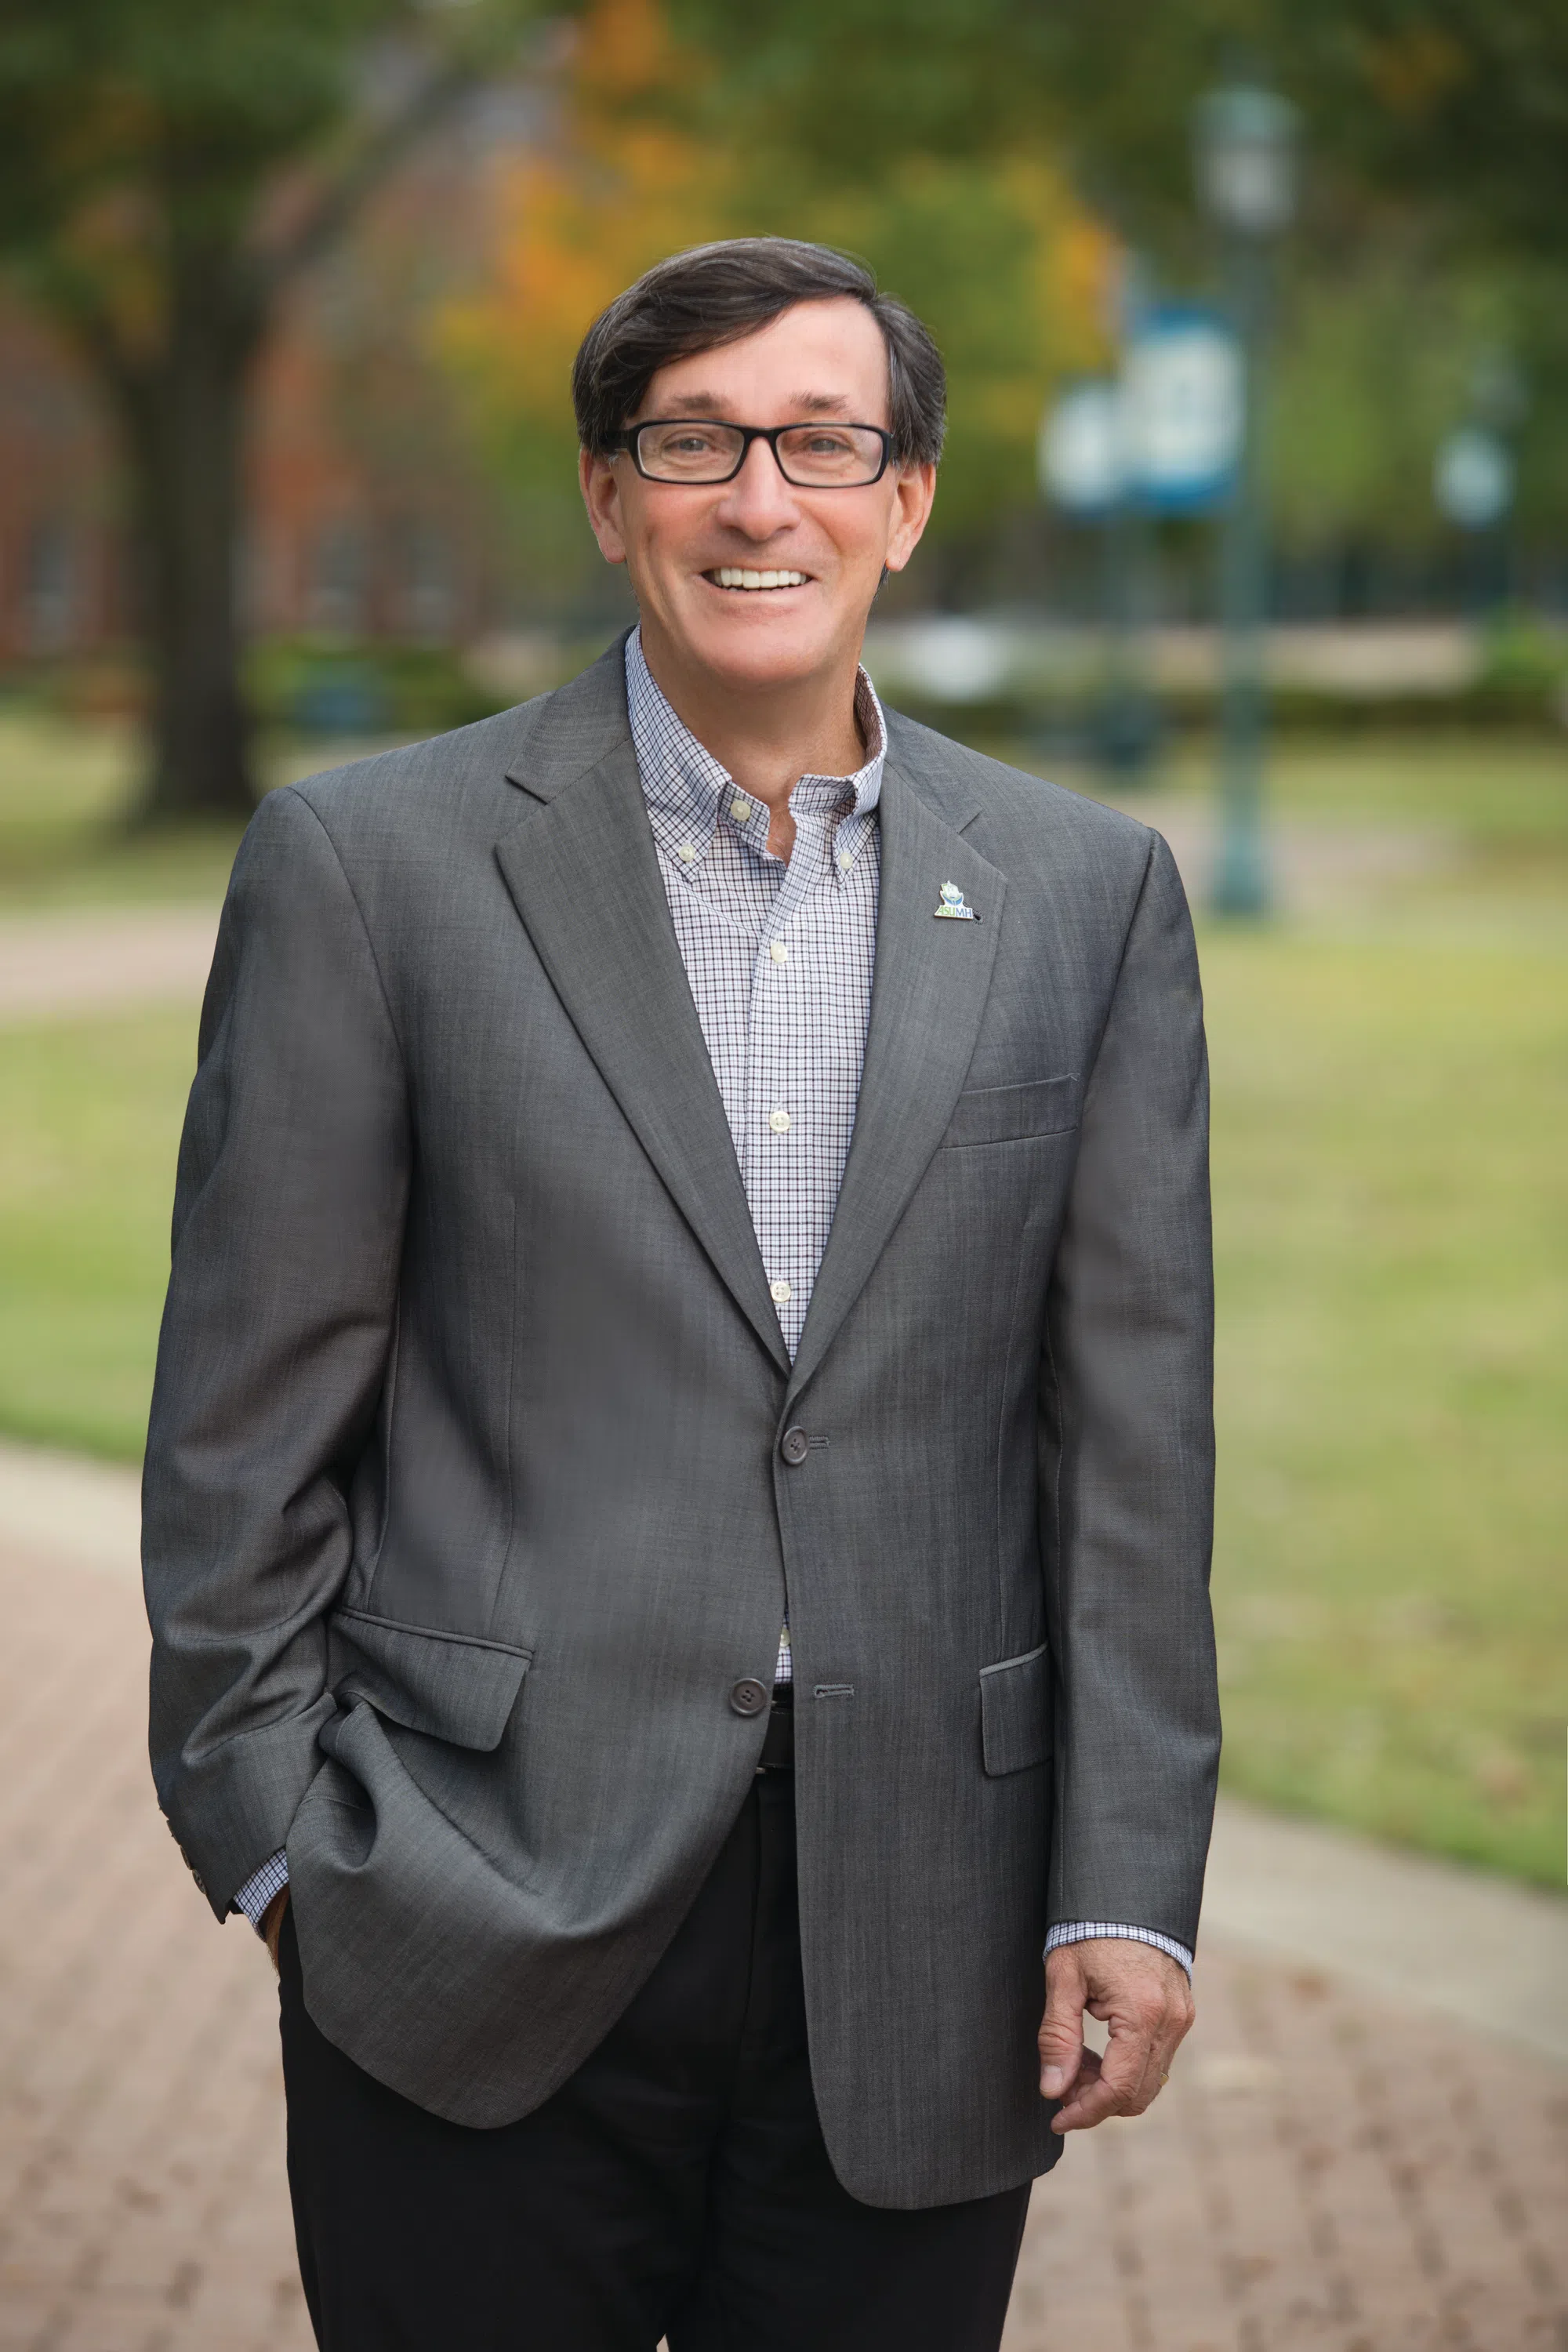 Image of Chancellor Robin Myers